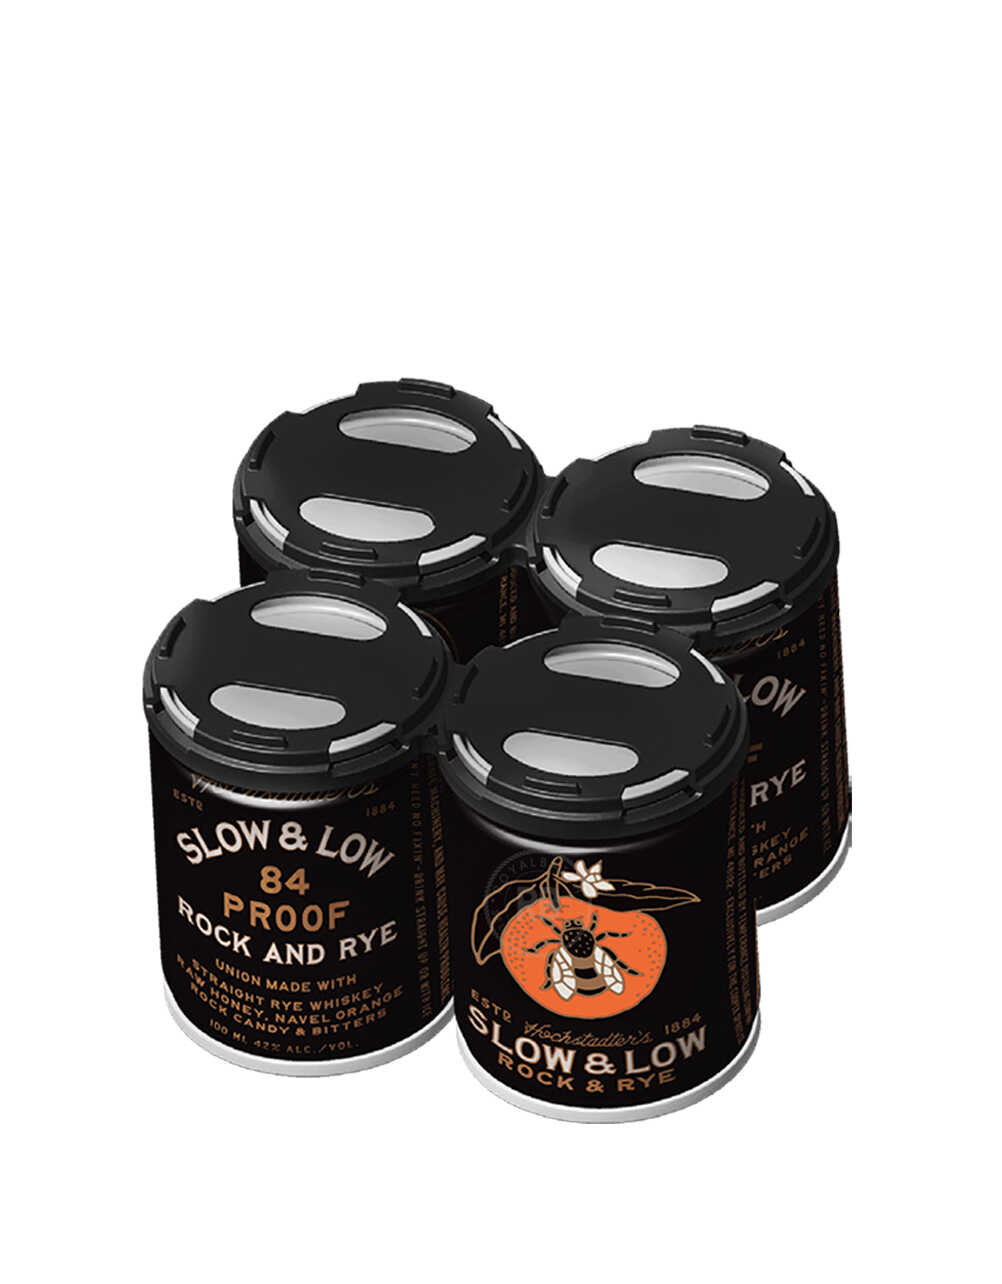 Slow and Low Rock and Rye (4 Pack) x 100ml